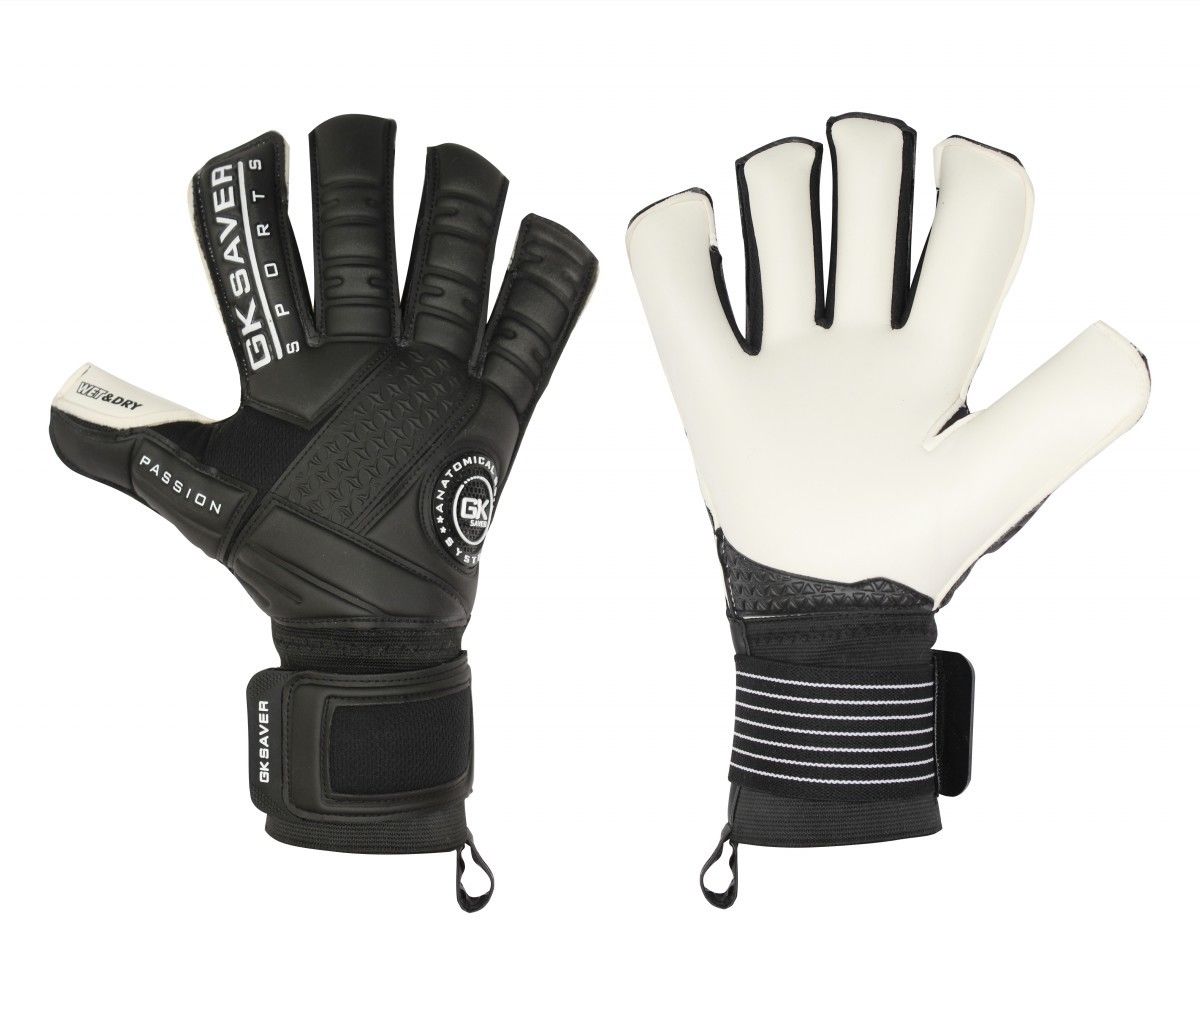 Details about   Football Soccer Goalkeeper Gloves Professional Gk Saver Passion Ps10 Wet & Dry 